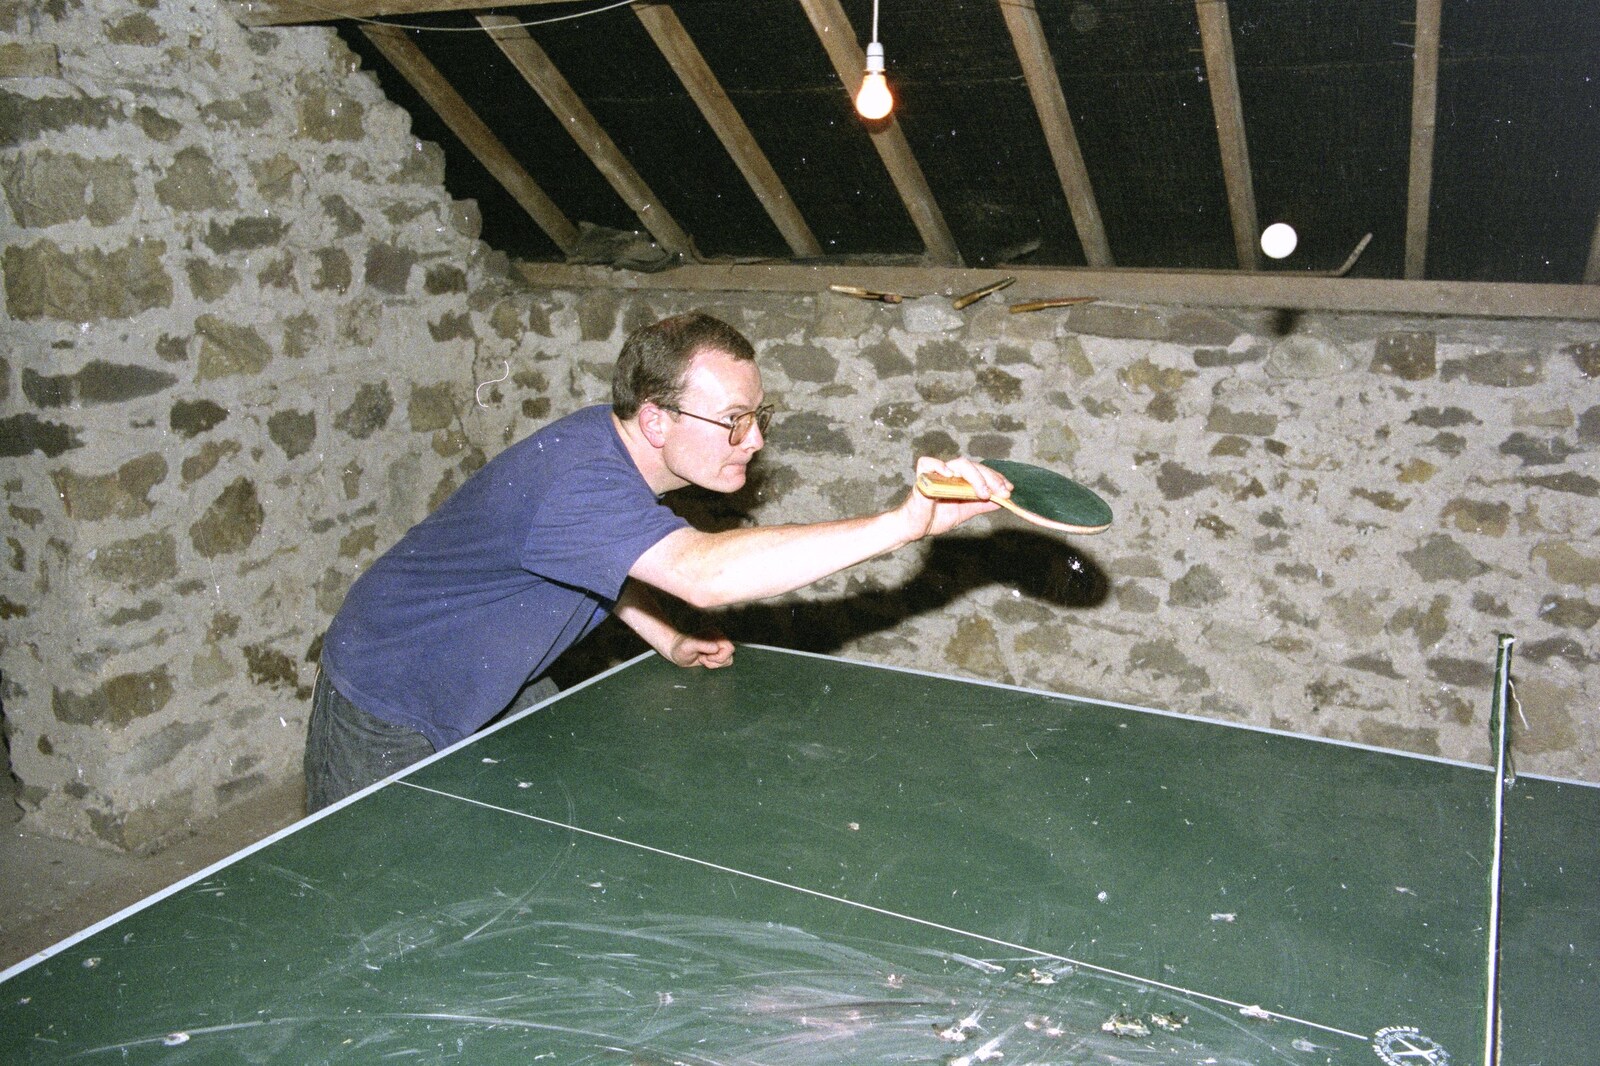 Liz's Party, Abergavenny, Monmouthshire, Wales - 4th August 1990: Hamish looks serious about his ping pong